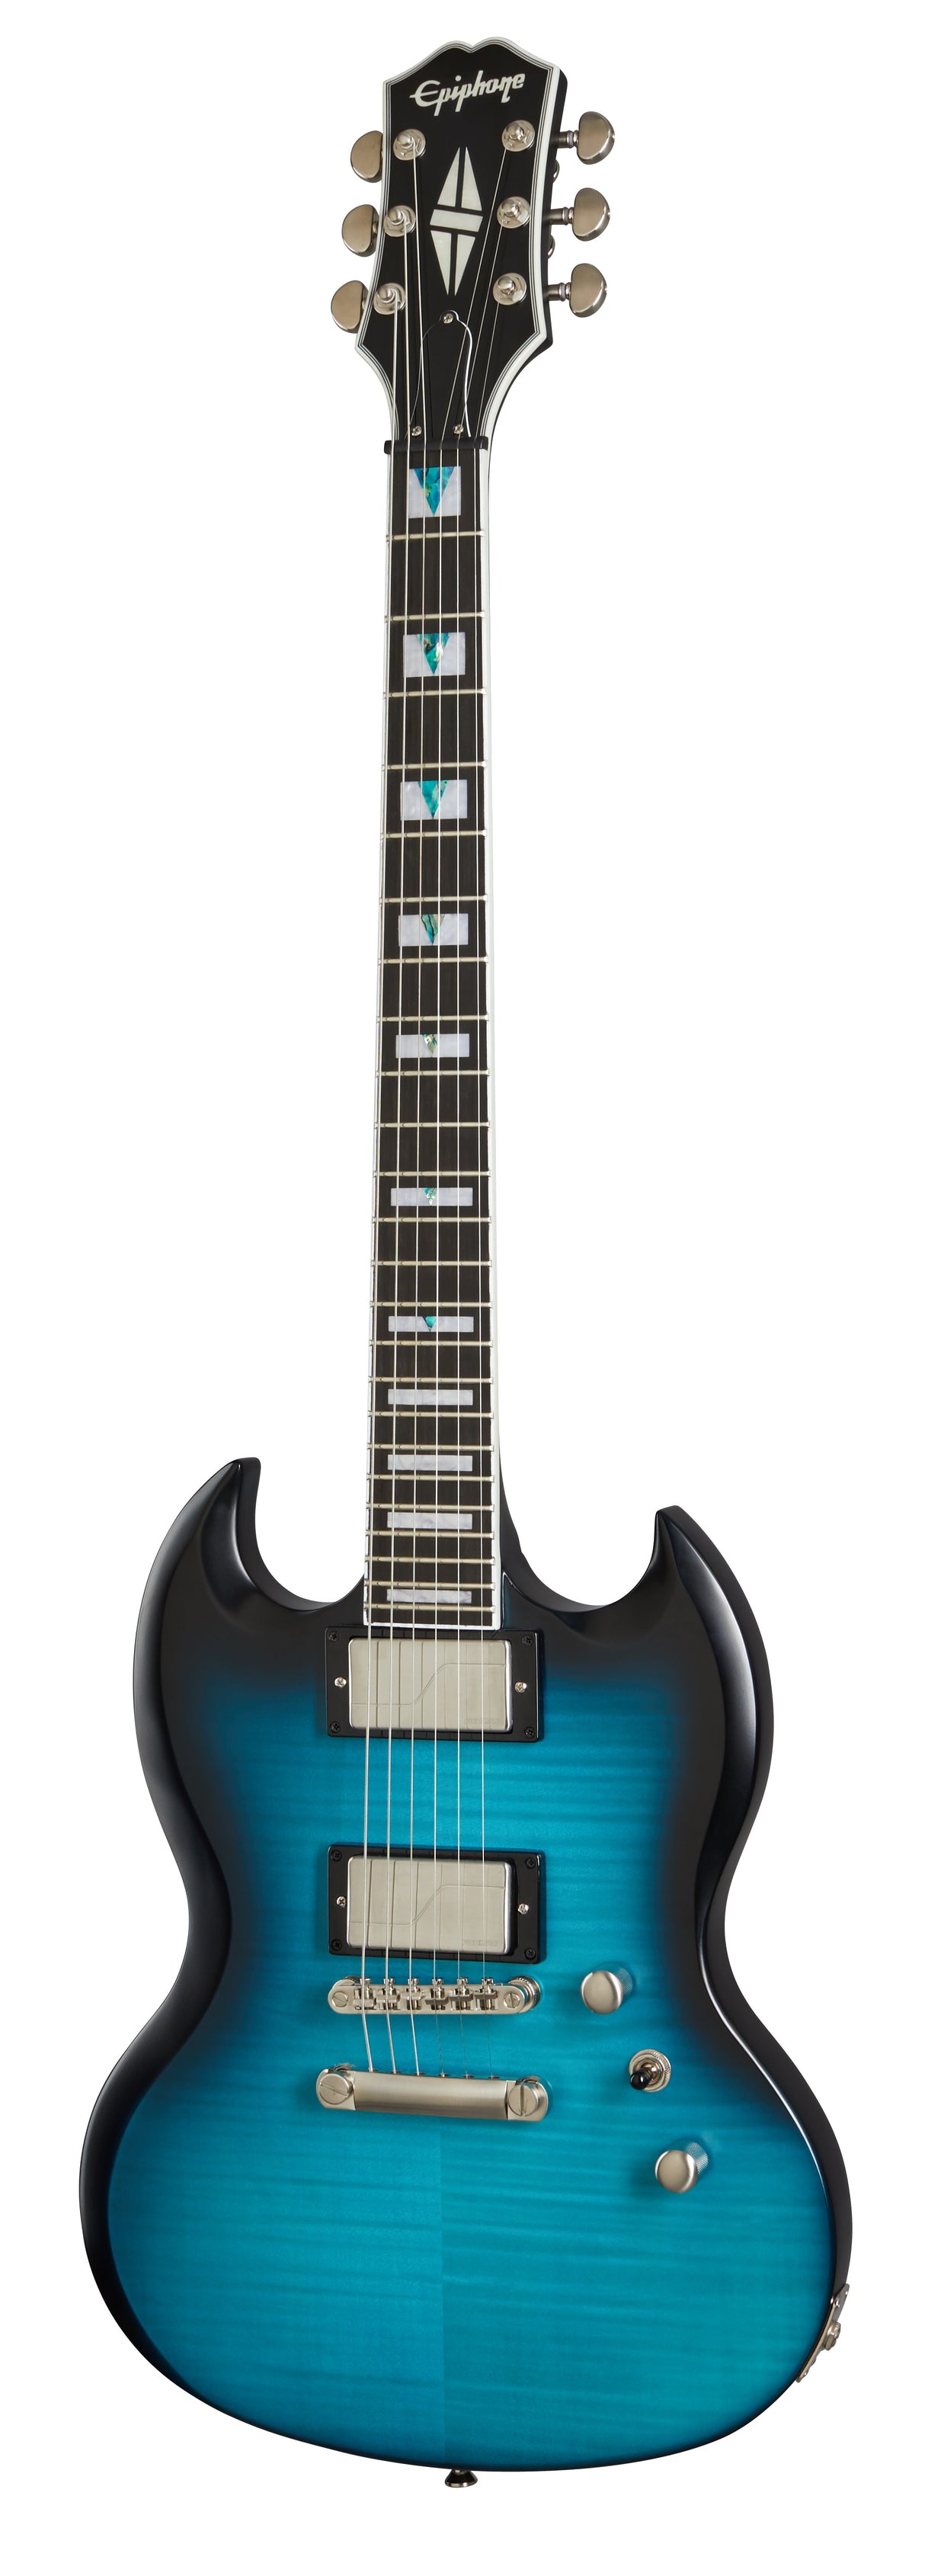 Epiphone Prophecy SG Electric Guitar, Blue Tiger Aged Gloss